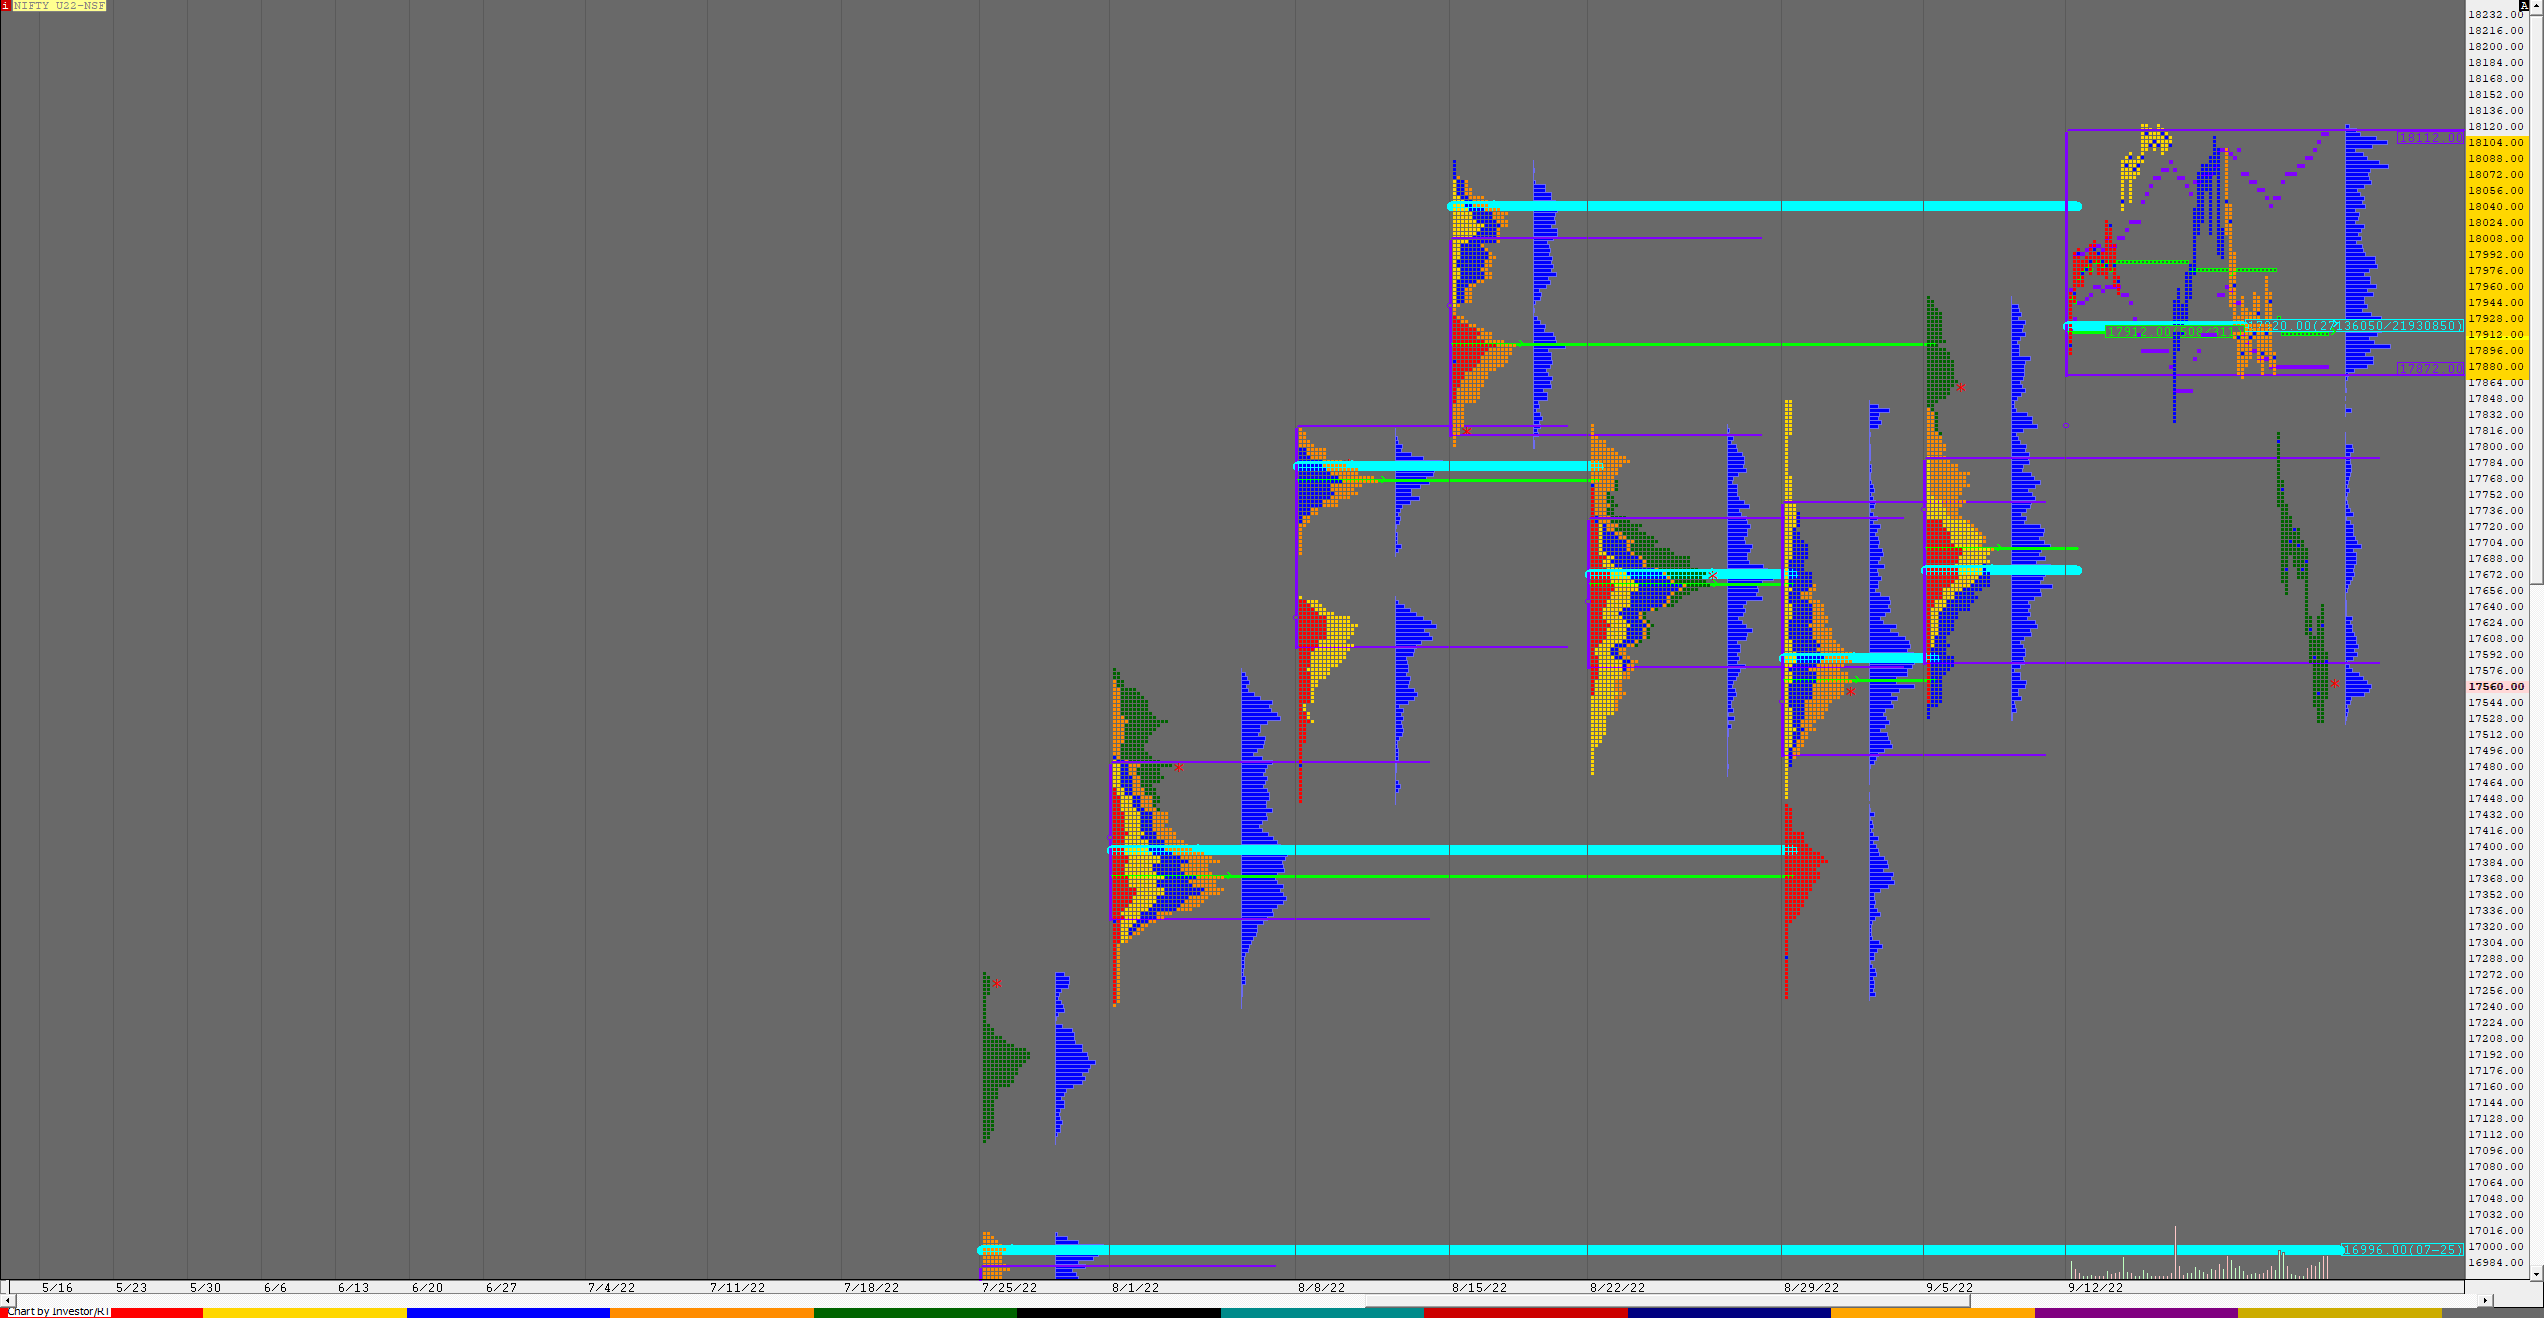 Nf F 3 Weekly Charts (12Th To 16Th Sep 2022) And Market Profile Analysis Banknifty Futures, Charts, Day Trading, Intraday Trading, Intraday Trading Strategies, Market Profile, Market Profile Trading Strategies, Nifty Futures, Order Flow Analysis, Support And Resistance, Technical Analysis, Trading Strategies, Volume Profile Trading